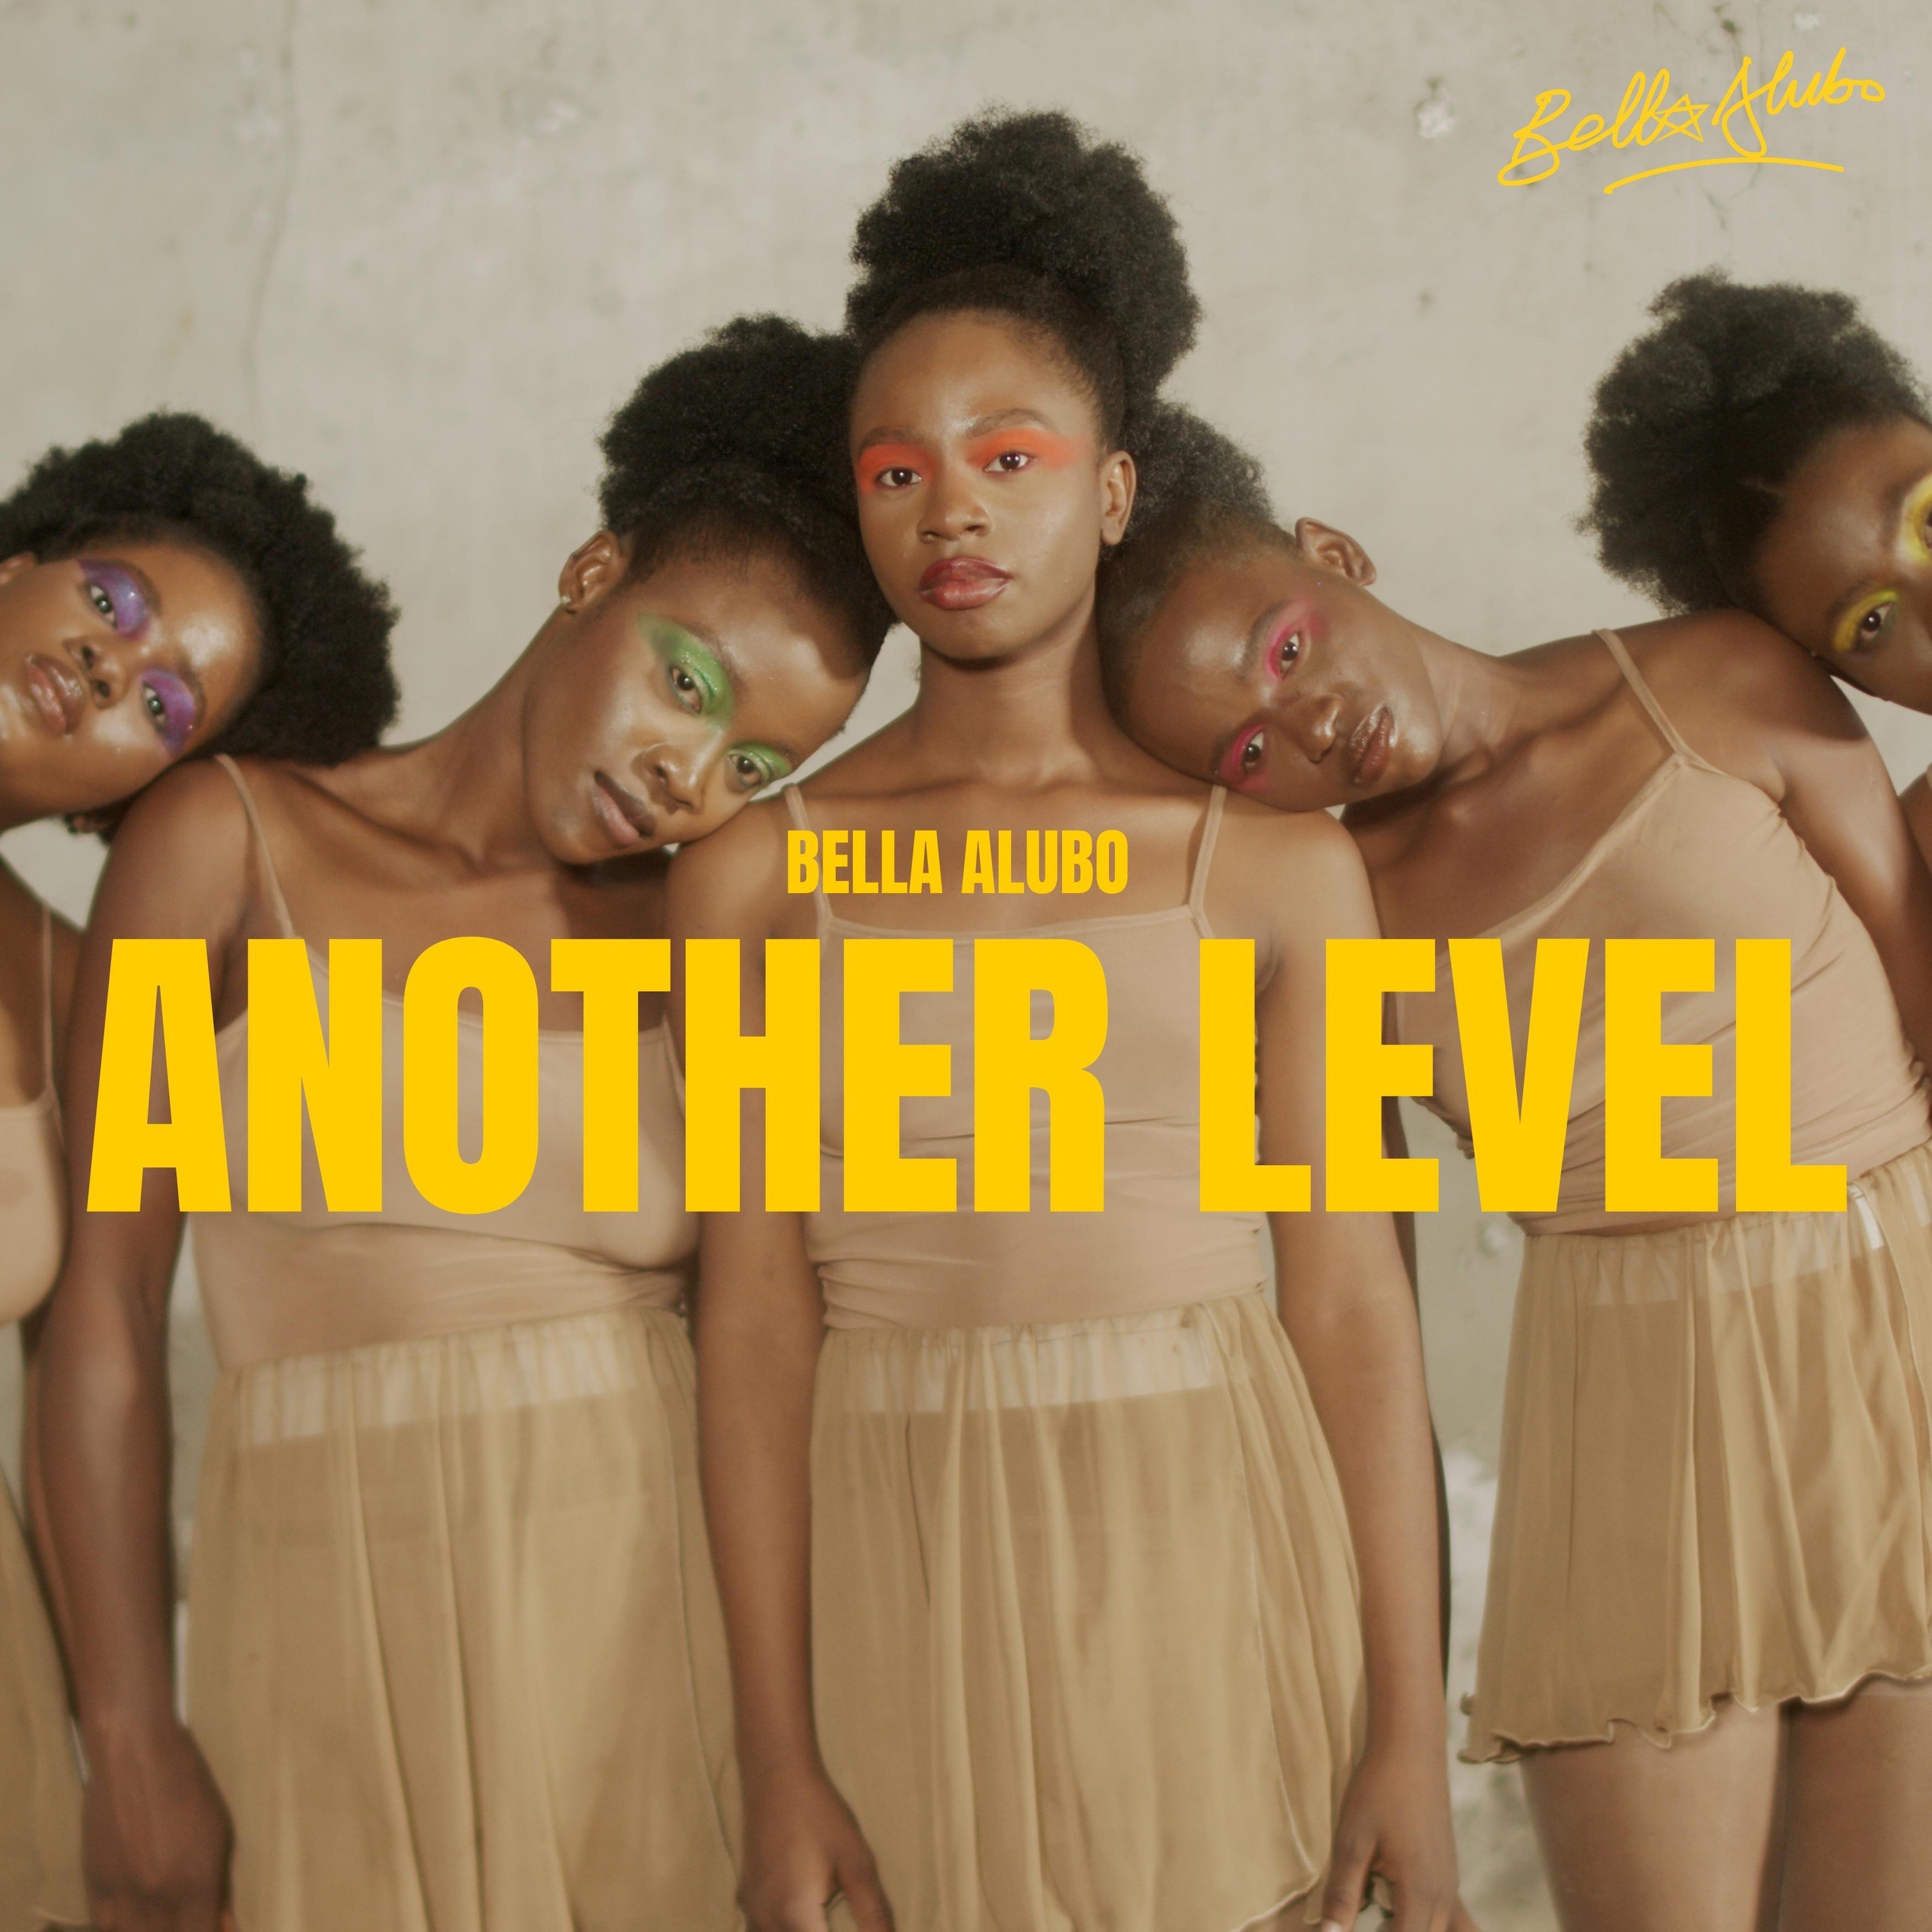 Another Level - Single